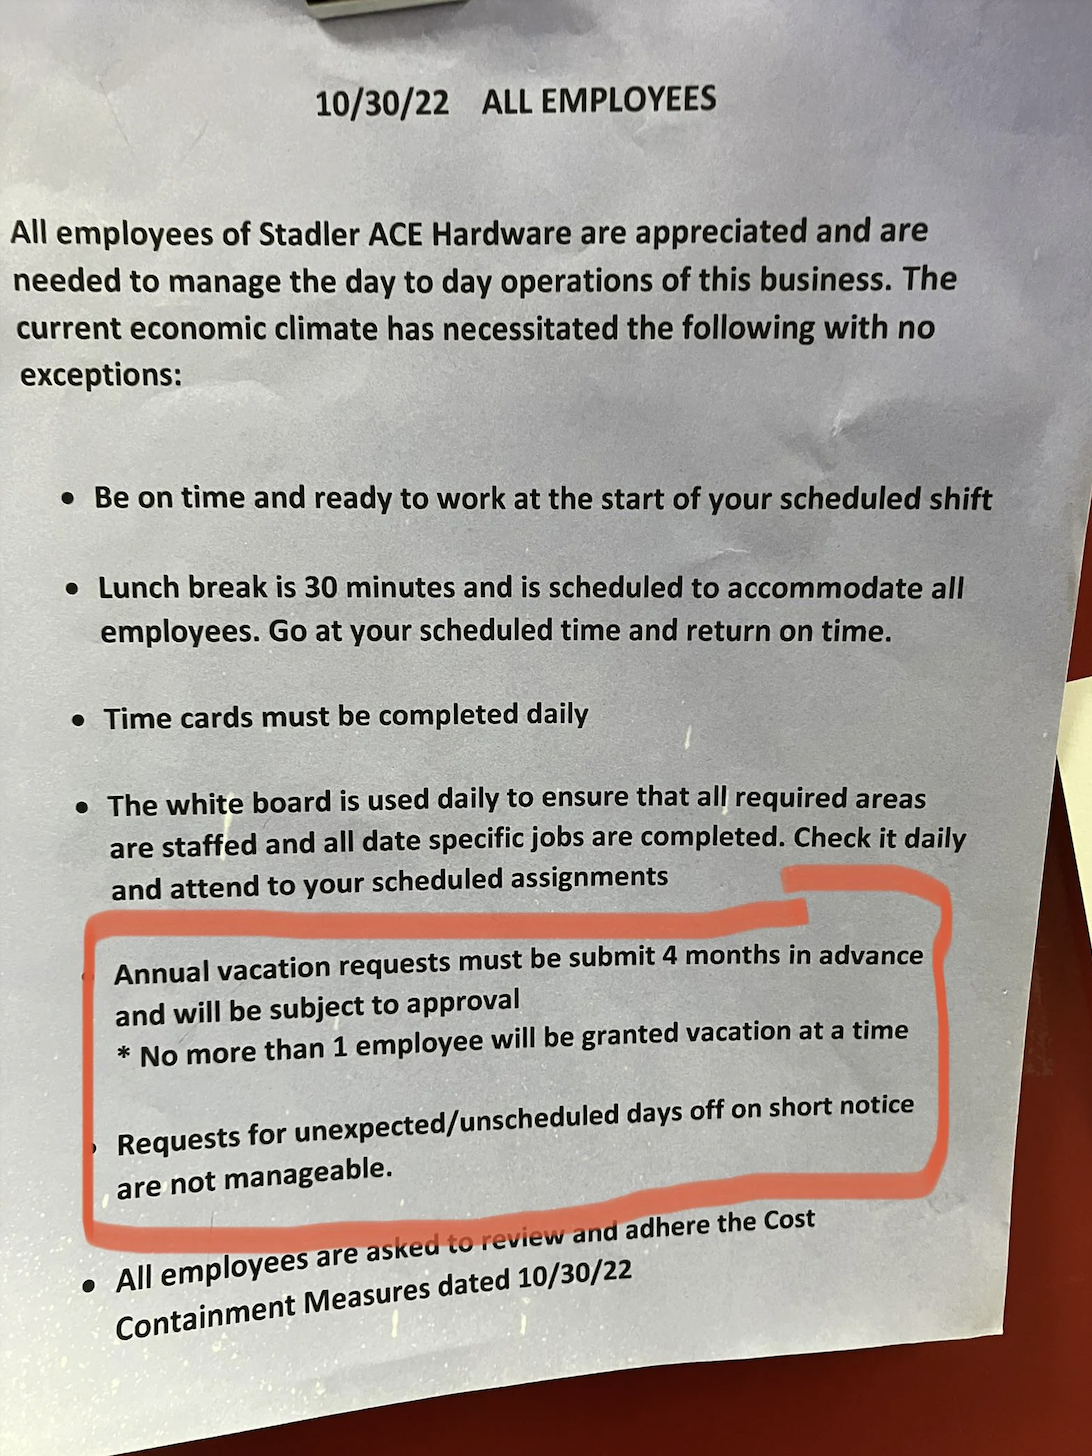 document - 103022 All Employees All employees of Stadler Ace Hardware are appreciated and are needed to manage the day to day operations of this business. The current economic climate has necessitated the ing with no exceptions Be on time and ready to wor